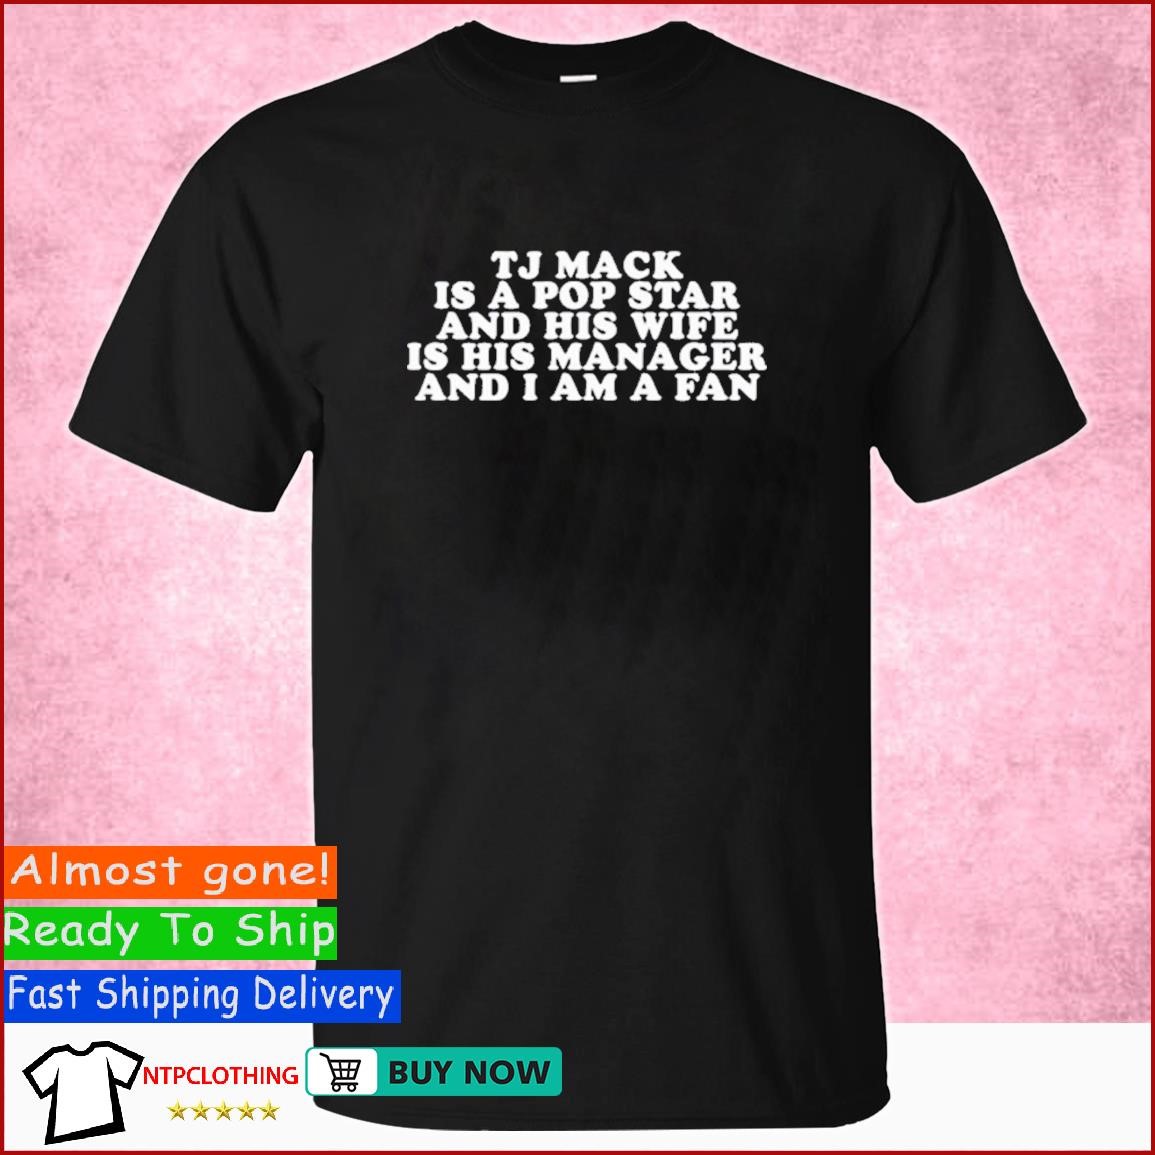 Brian Jordan Alvarez Tj Mack Is A Pop Star And His Wife Is His Manager And  I Am A Fan Shirt, hoodie, longsleeve, sweater